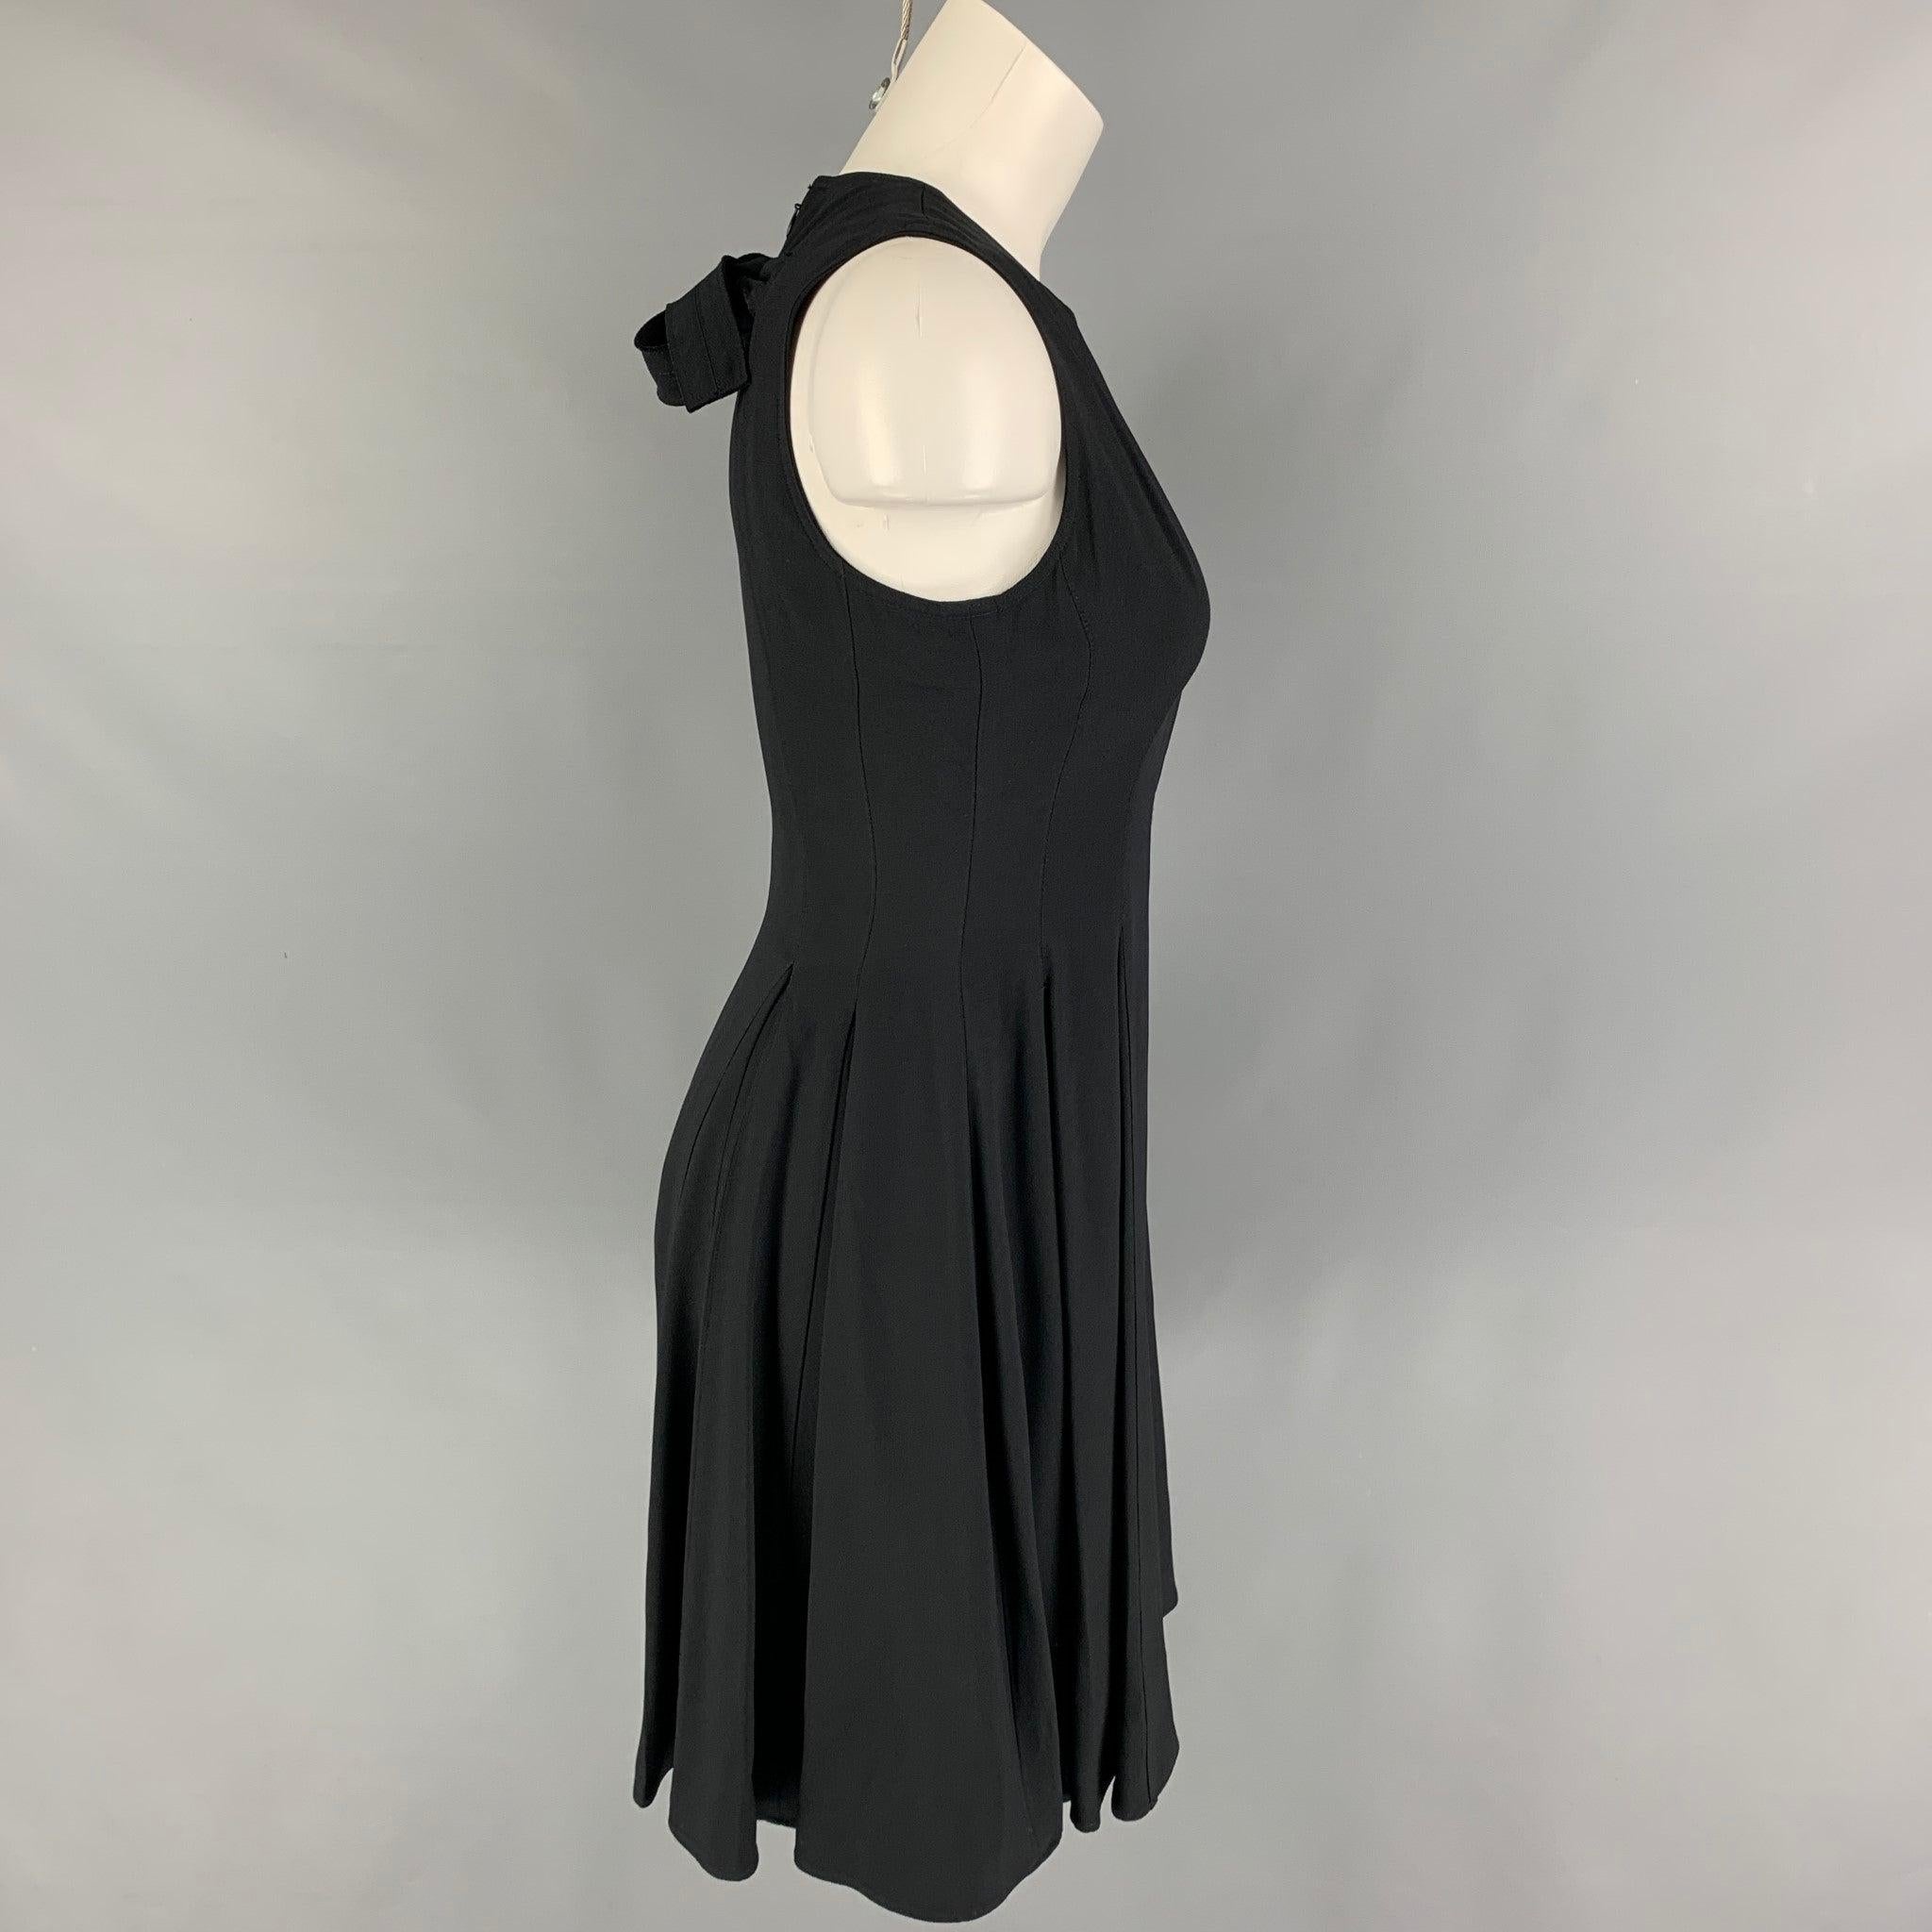 PROENZA SCHOULER Size 2 Black Acetate Viscose A-Line Dress In Excellent Condition For Sale In San Francisco, CA